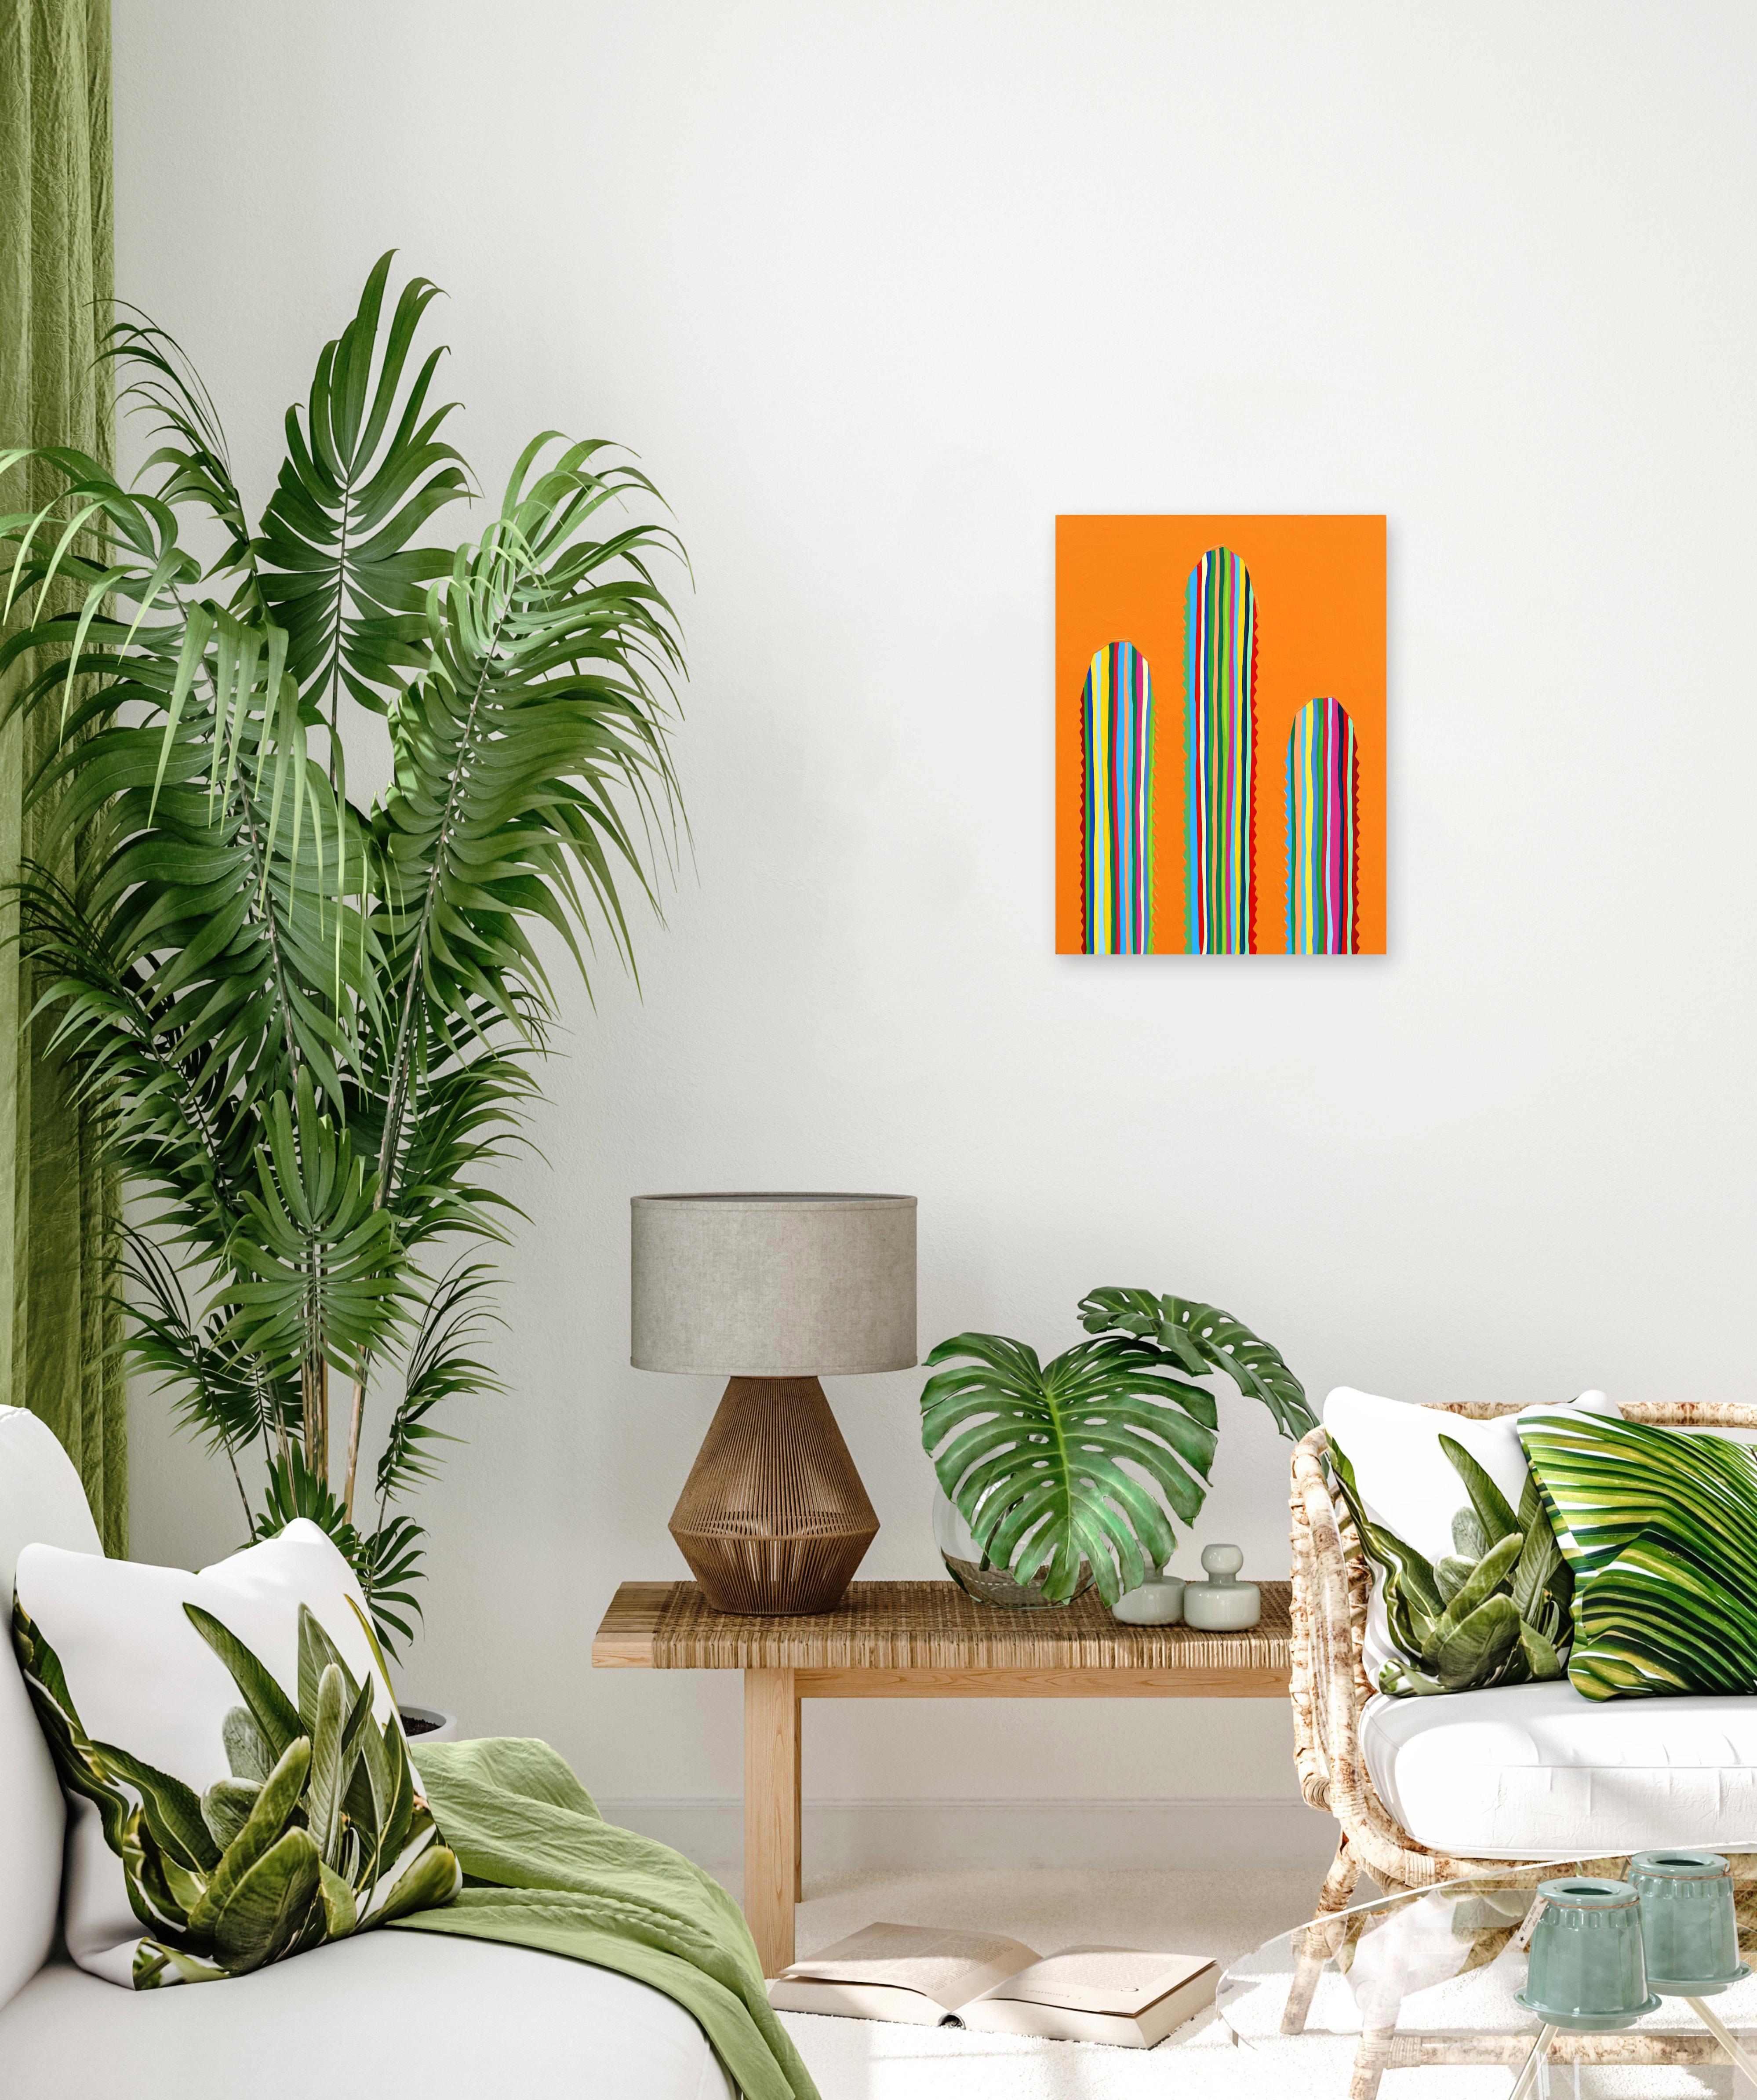 Will Beger and his contemporary-minimalist paintings, take on an entirely unique approach to southwest art. Influenced by his youth and inspired by nature, he effortlessly captures a vibrant, bohemian aesthetic that is unapologetically true to his